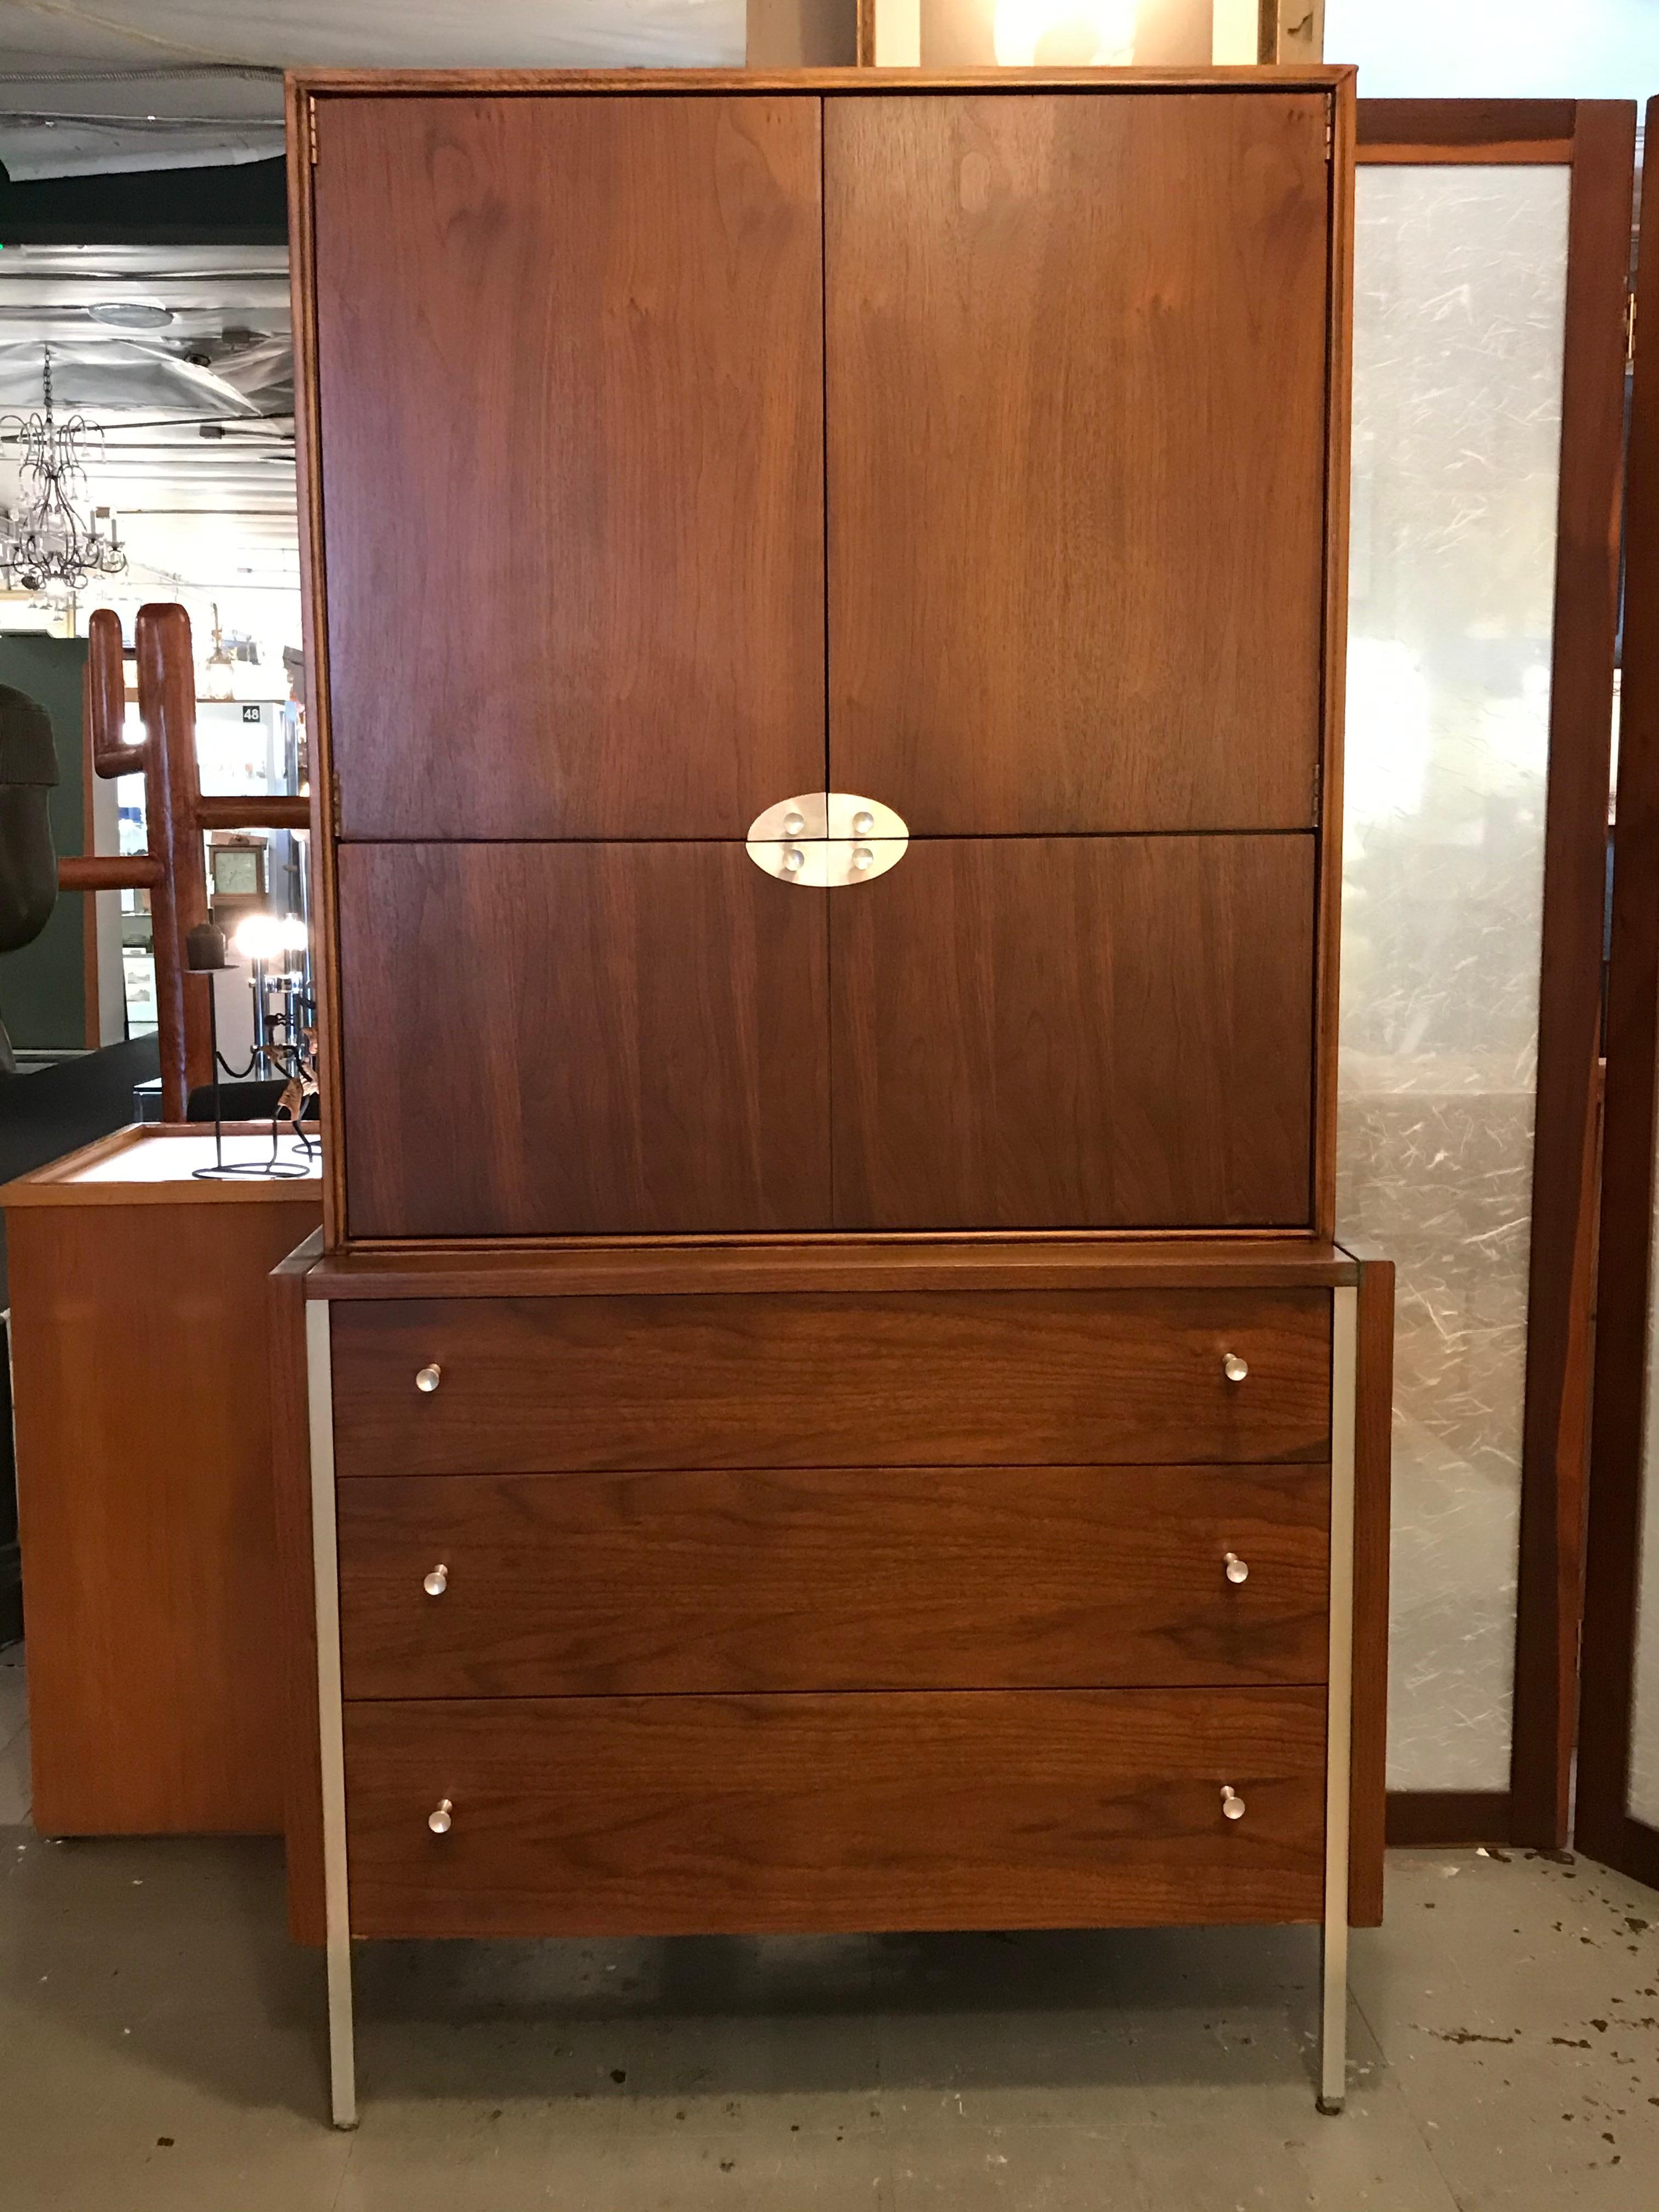 This walnut cabinet secretary can be a bar or a desk.
It also features a dresser on the bottom part and a little cupboard on the top (16.75